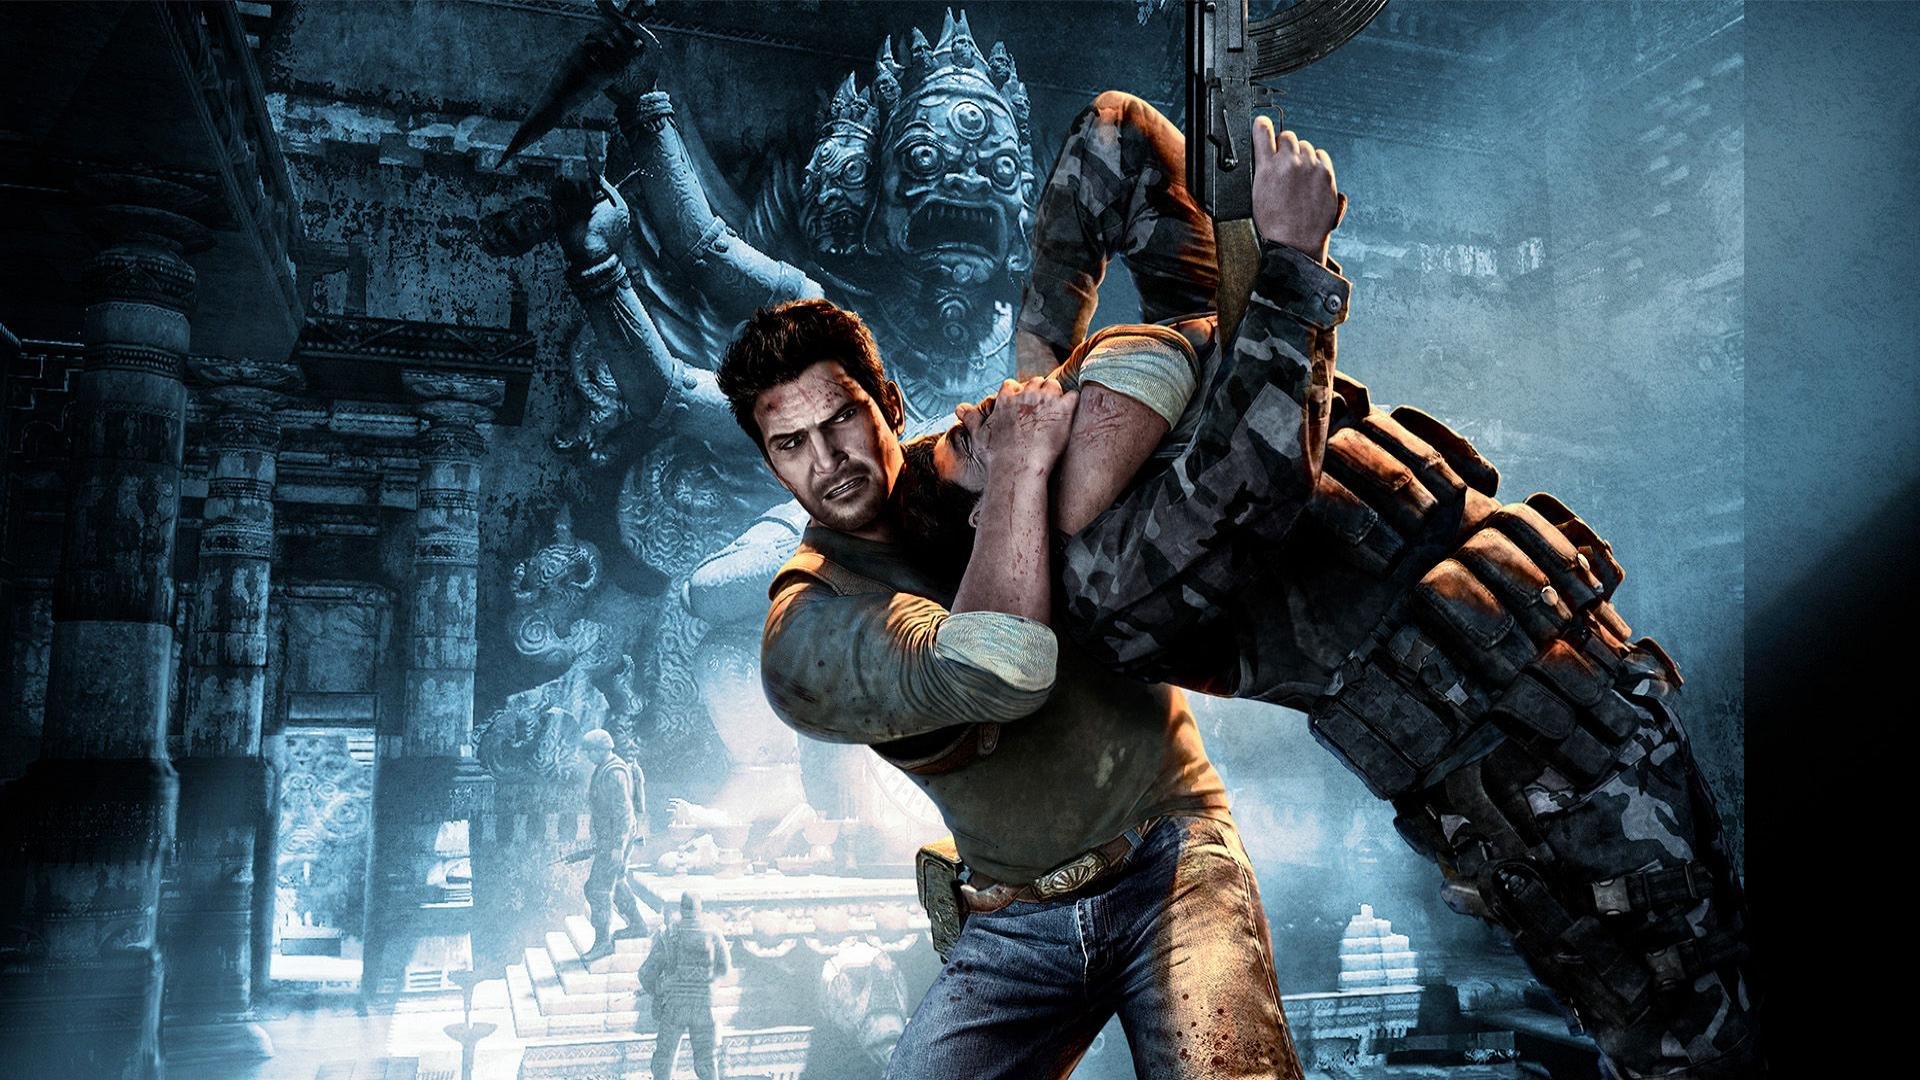 Best Uncharted 2: Among Thieves wallpaper ID:496778 for High Resolution full hd 1080p computer